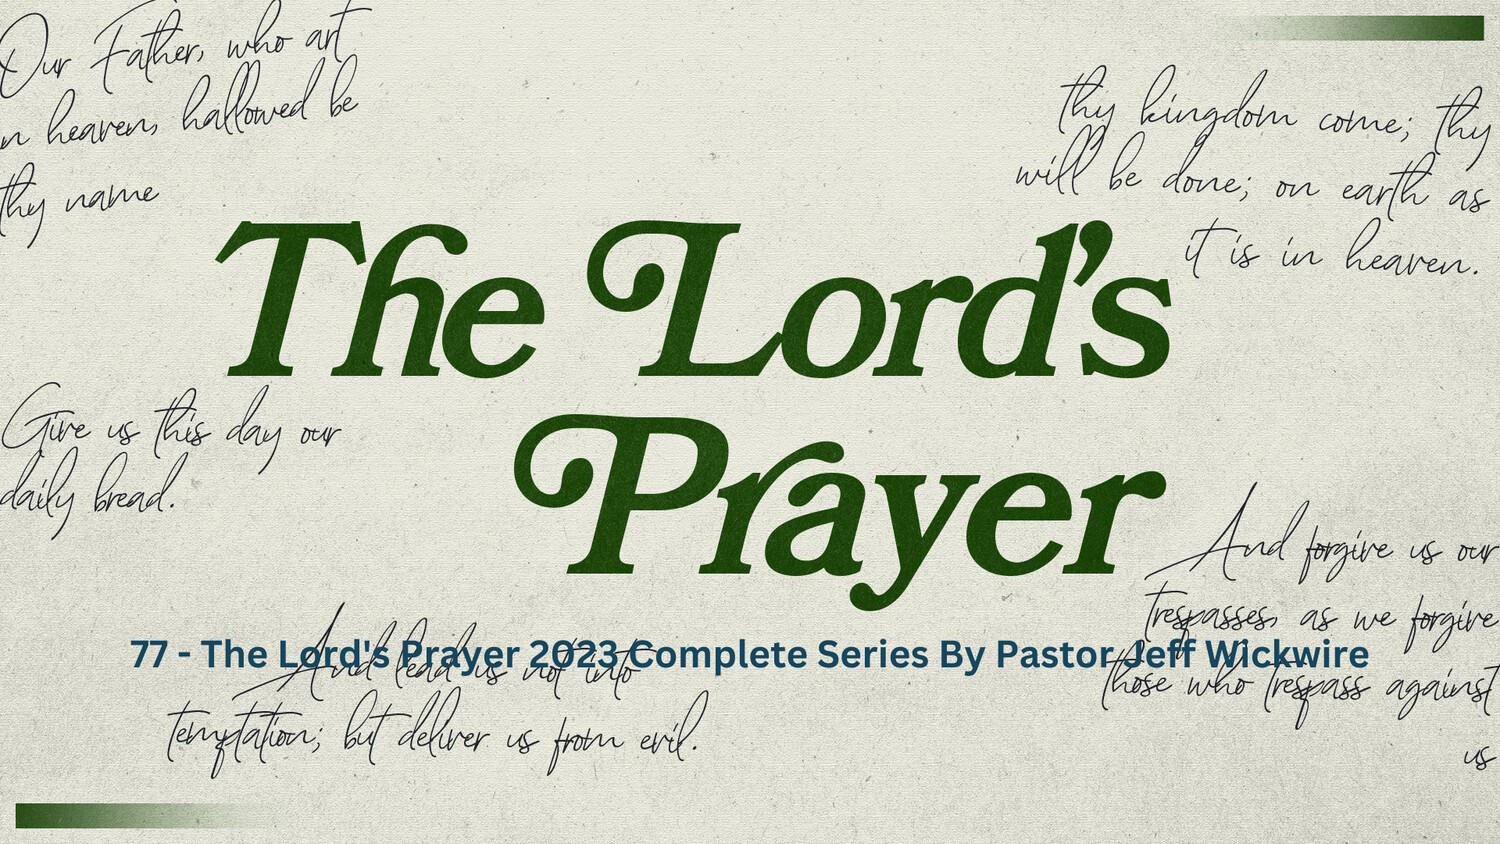 77 - The Lord's Prayer 2023 - Complete Series By Pastor Jeff Wickwire